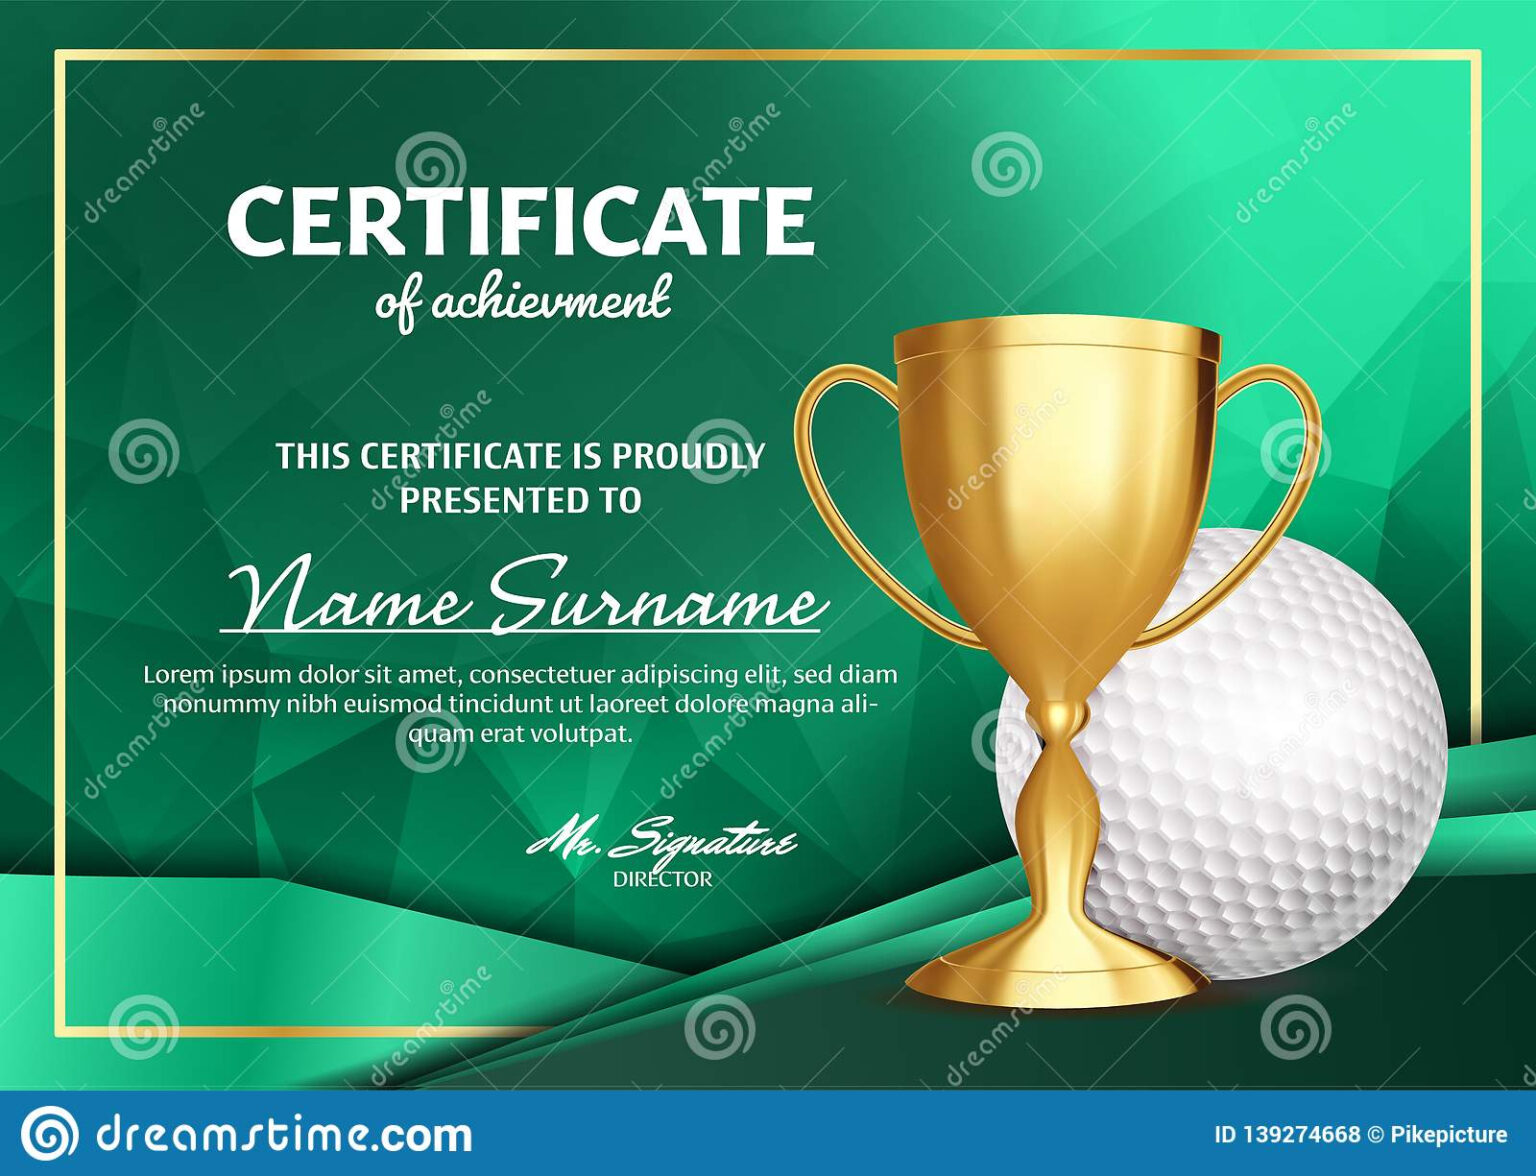 golf gift certificate template 4 gift certificate pertaining to golf - golf gift certificate editable template printable personalized golf | golf gift certificate template printable